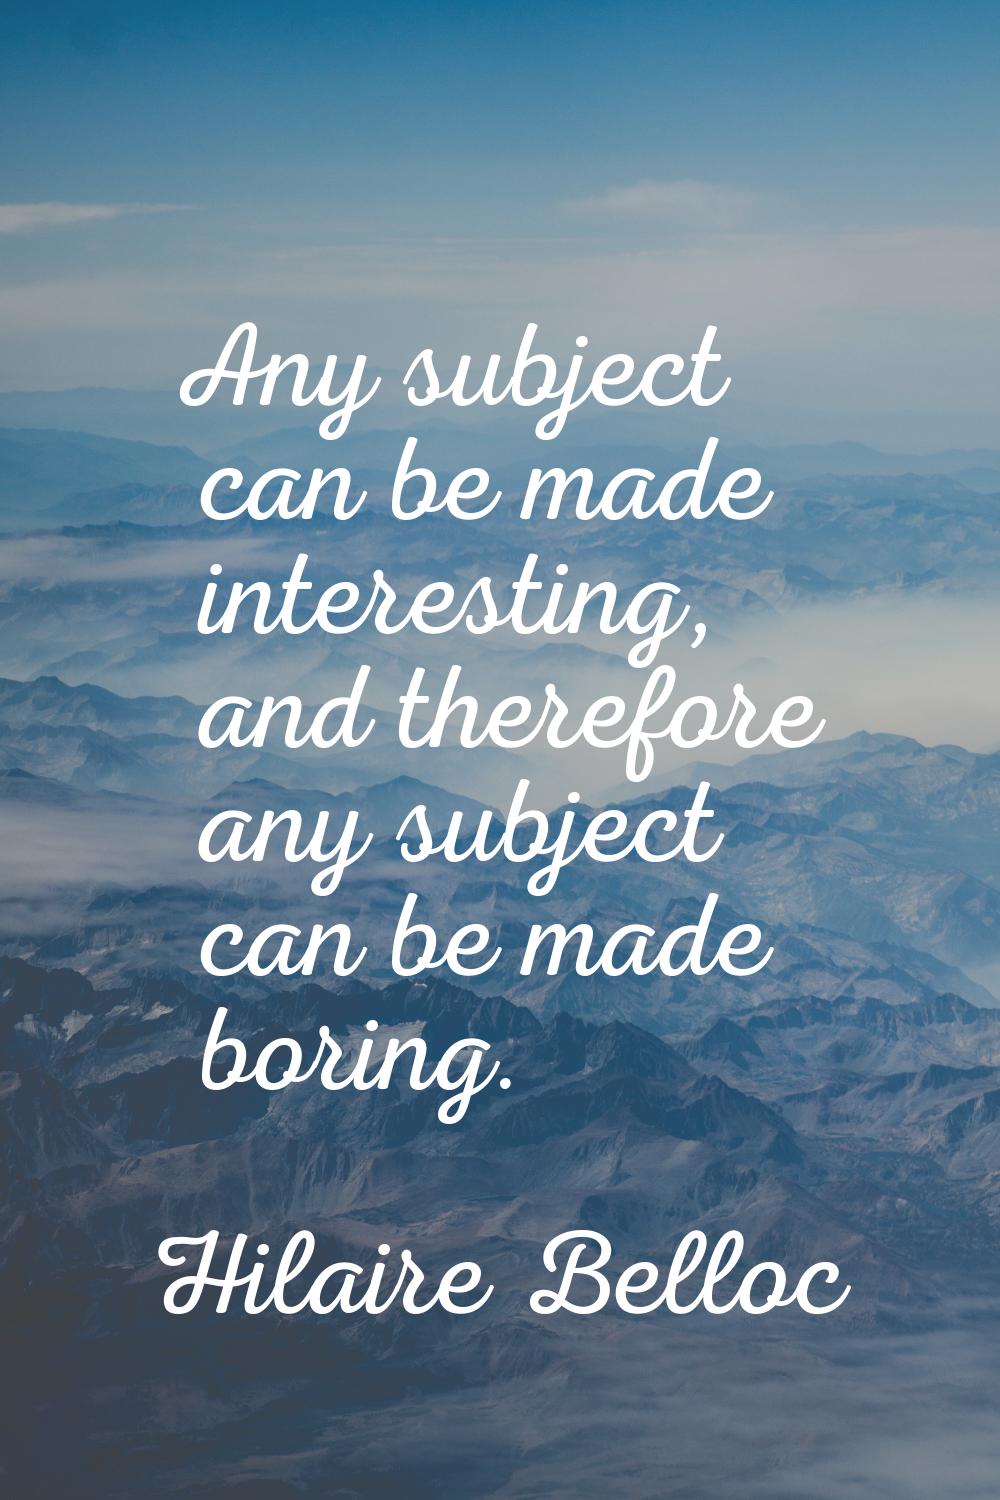 Any subject can be made interesting, and therefore any subject can be made boring.